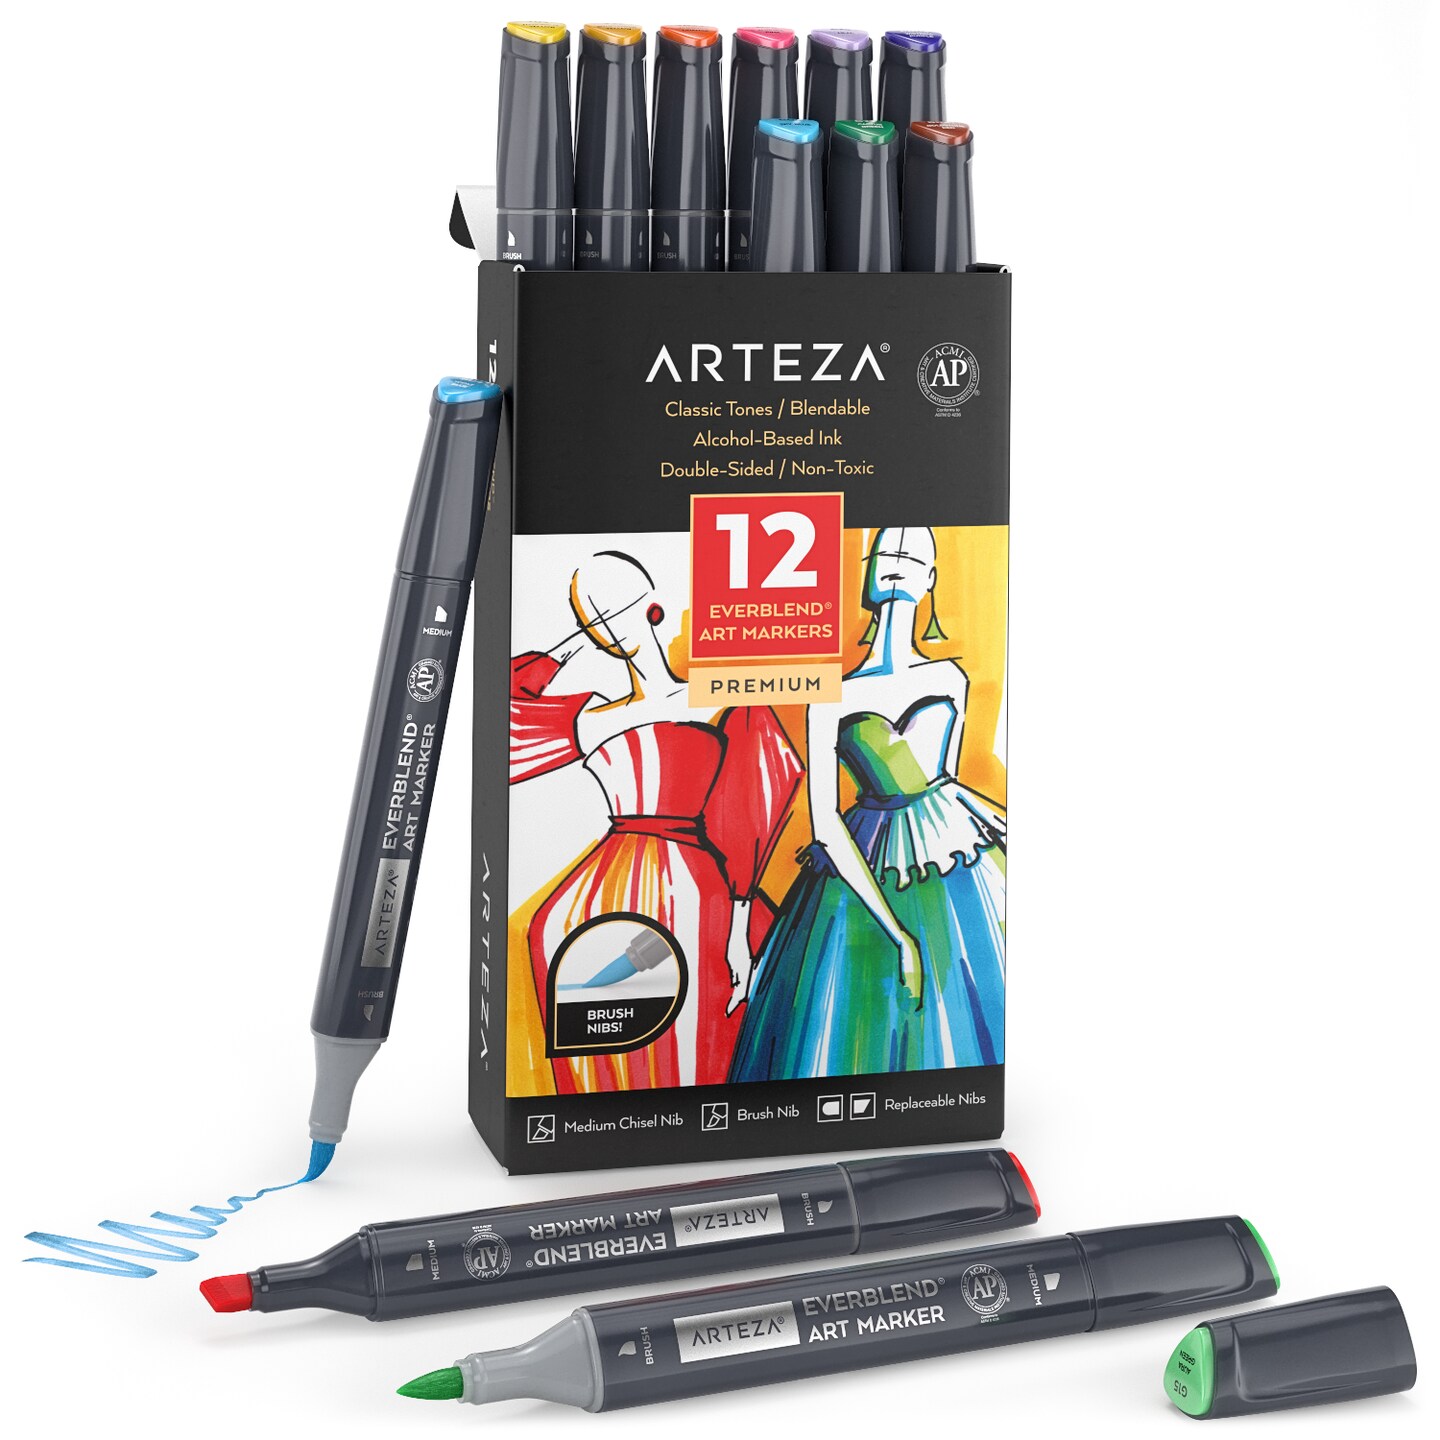 ARTEZA Fabric Paint Markers, Set of 30, Permanent Dual-Tip Textile Marker,  Assorted Colors, Art Supplies for Coloring T-Shirts, Jeans, Jackets, and